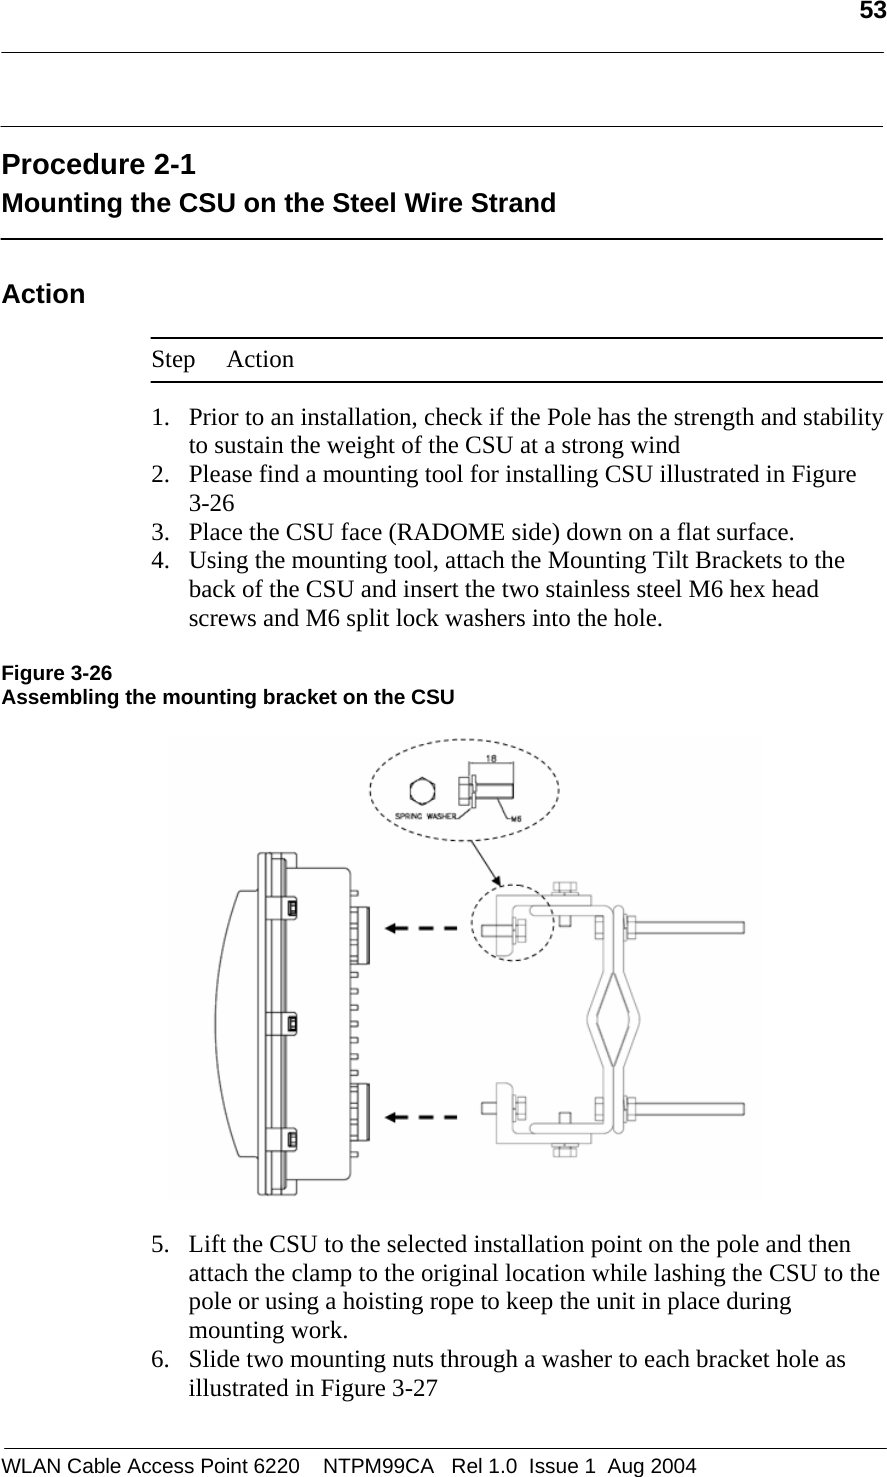   53   Procedure 2-1 Mounting the CSU on the Steel Wire Strand  Action  Step Action  1. Prior to an installation, check if the Pole has the strength and stability to sustain the weight of the CSU at a strong wind 2. Please find a mounting tool for installing CSU illustrated in Figure  3-26 3. Place the CSU face (RADOME side) down on a flat surface.  4. Using the mounting tool, attach the Mounting Tilt Brackets to the back of the CSU and insert the two stainless steel M6 hex head screws and M6 split lock washers into the hole.  Figure 3-26 Assembling the mounting bracket on the CSU    5. Lift the CSU to the selected installation point on the pole and then attach the clamp to the original location while lashing the CSU to the pole or using a hoisting rope to keep the unit in place during mounting work.  6. Slide two mounting nuts through a washer to each bracket hole as illustrated in Figure 3-27 WLAN Cable Access Point 6220    NTPM99CA   Rel 1.0  Issue 1  Aug 2004 